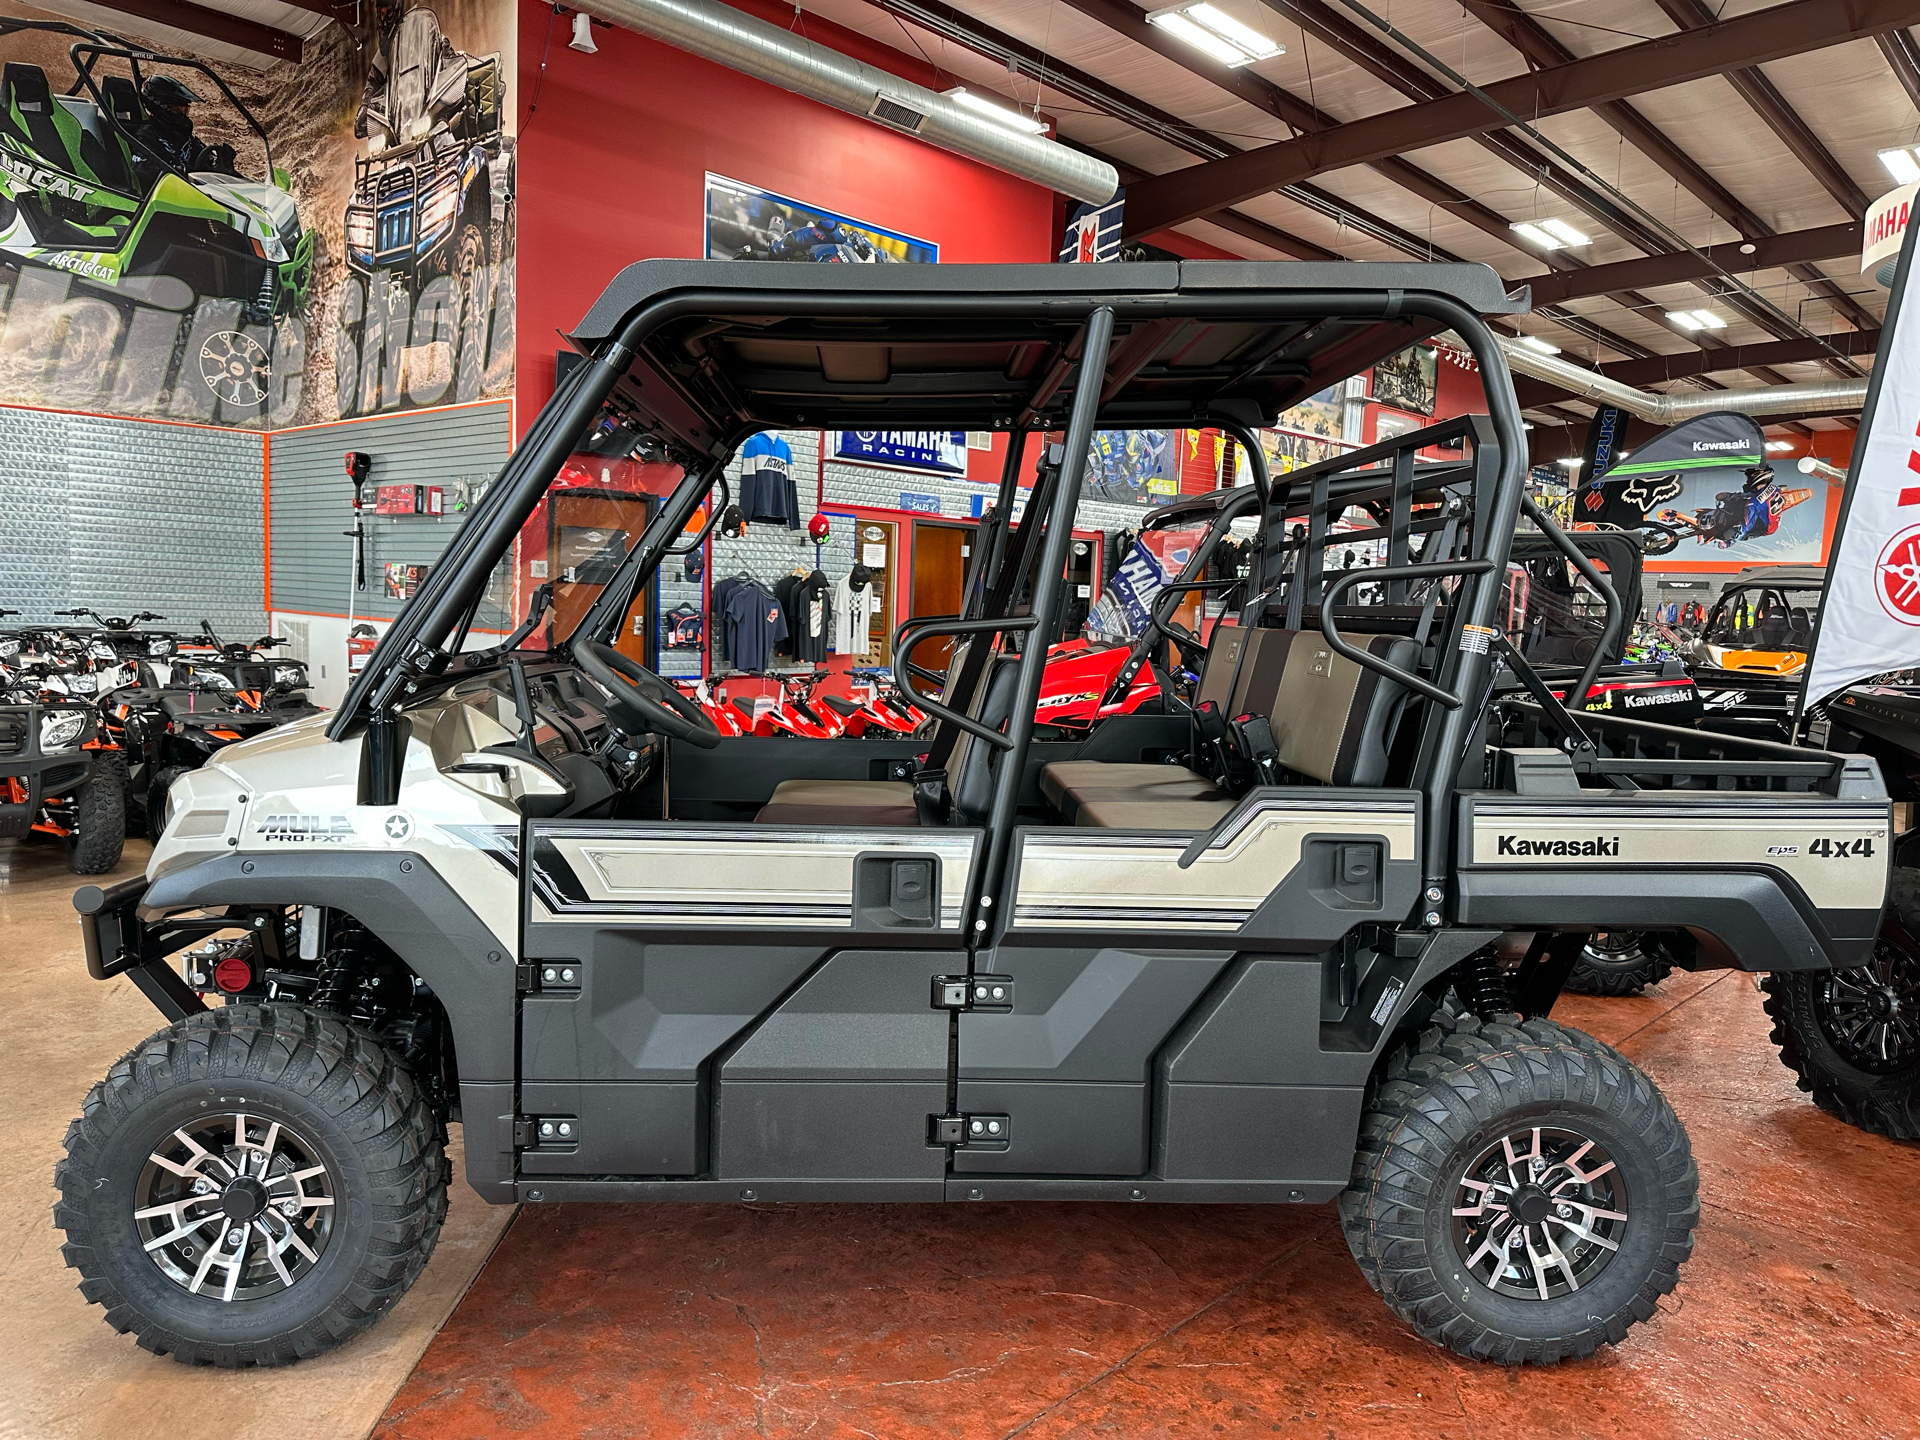 2023 Kawasaki Mule PRO-FXT Ranch Edition in Evansville, Indiana - Photo 2